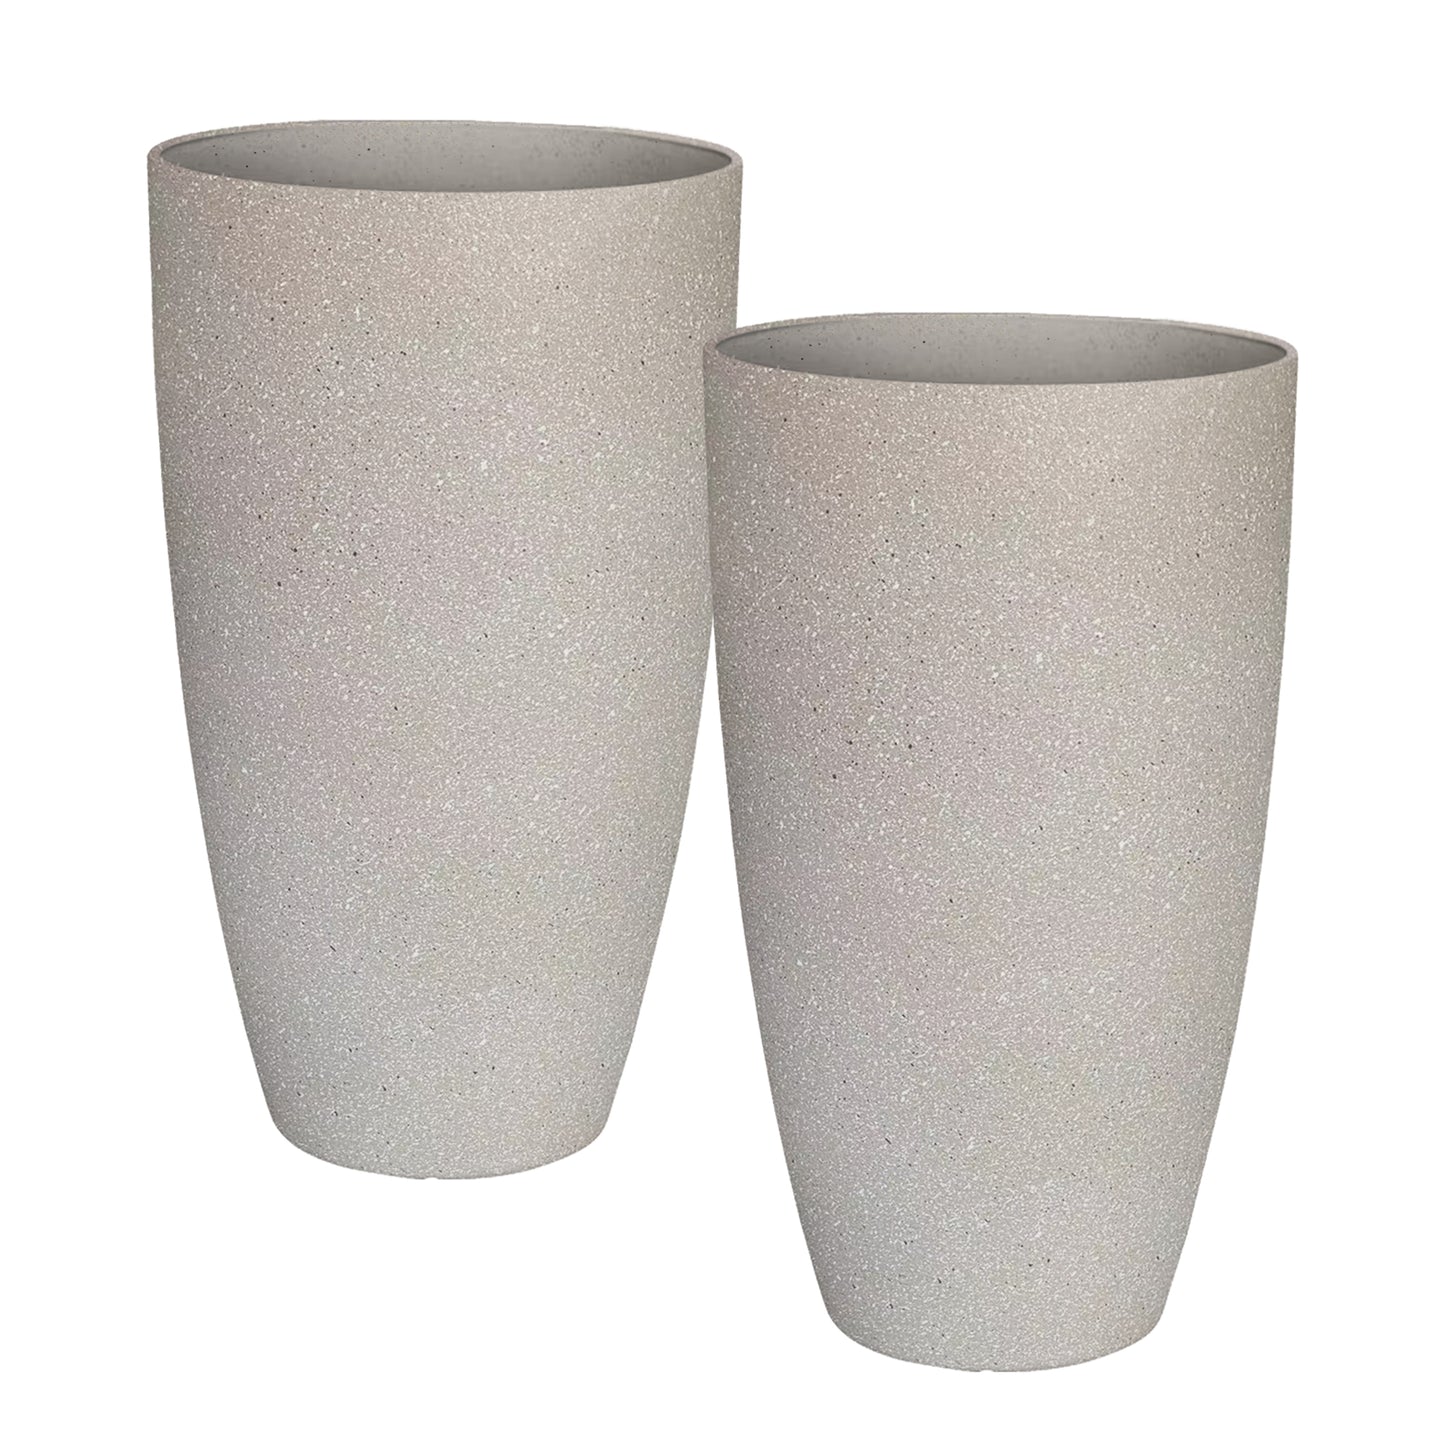 Modern Indoor/Outdoor Planters for Home Decor 2 Pack